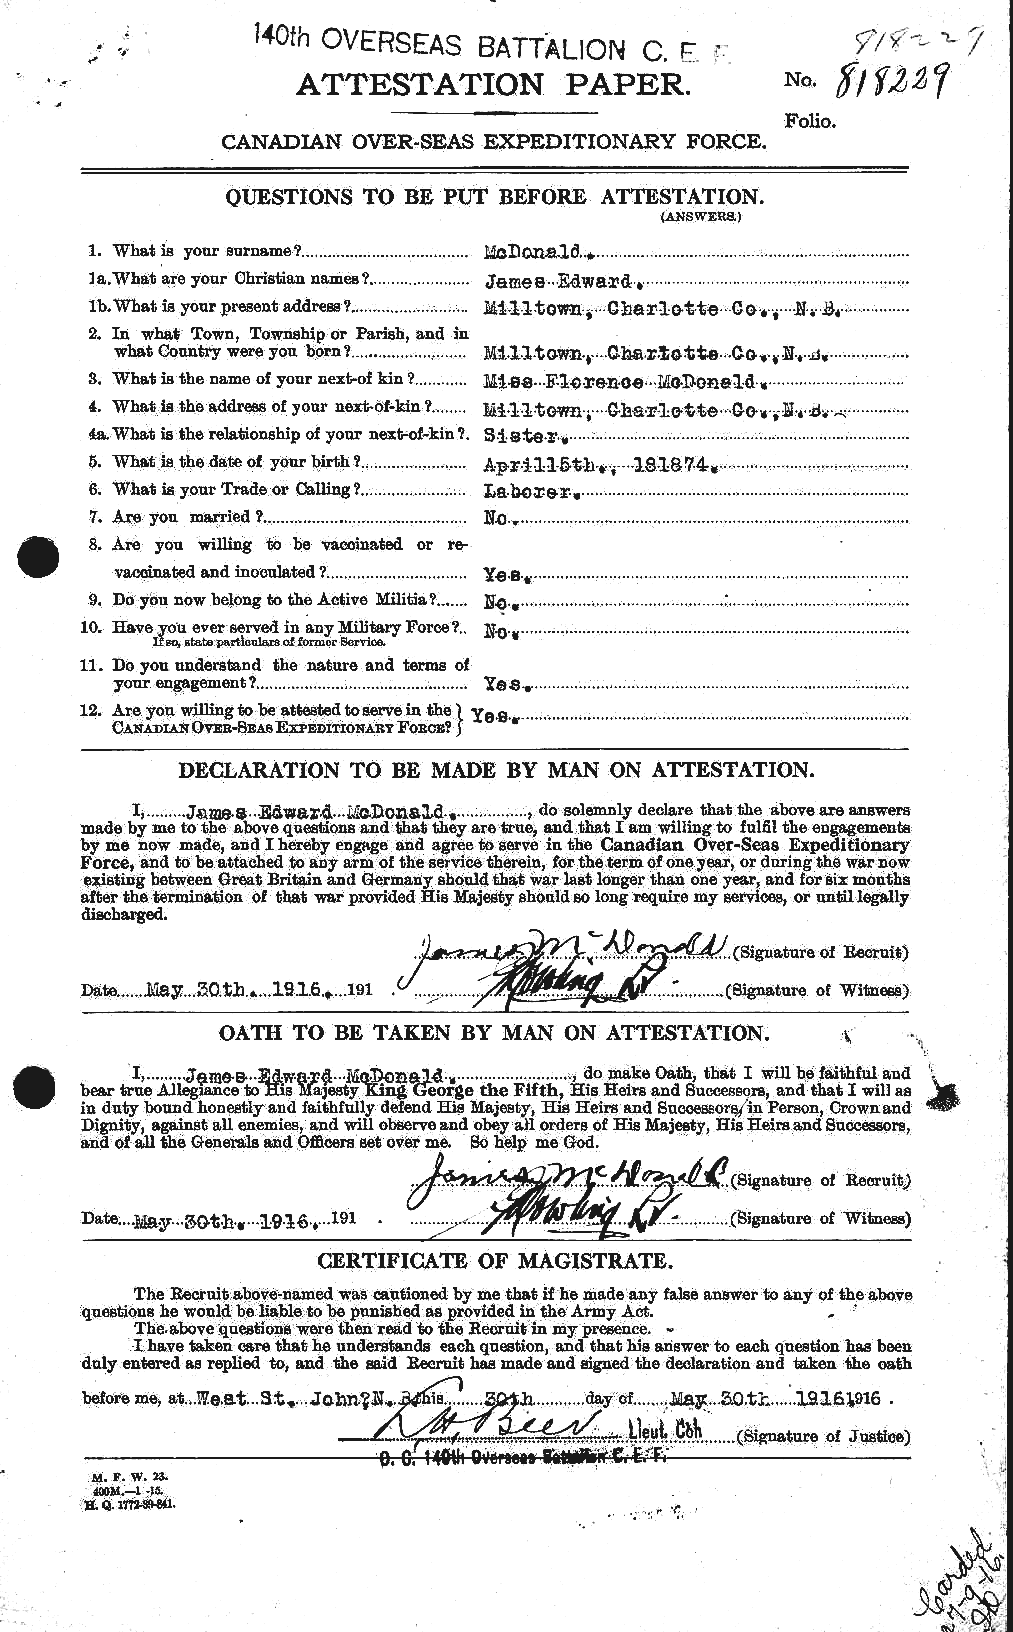 Personnel Records of the First World War - CEF 521624a